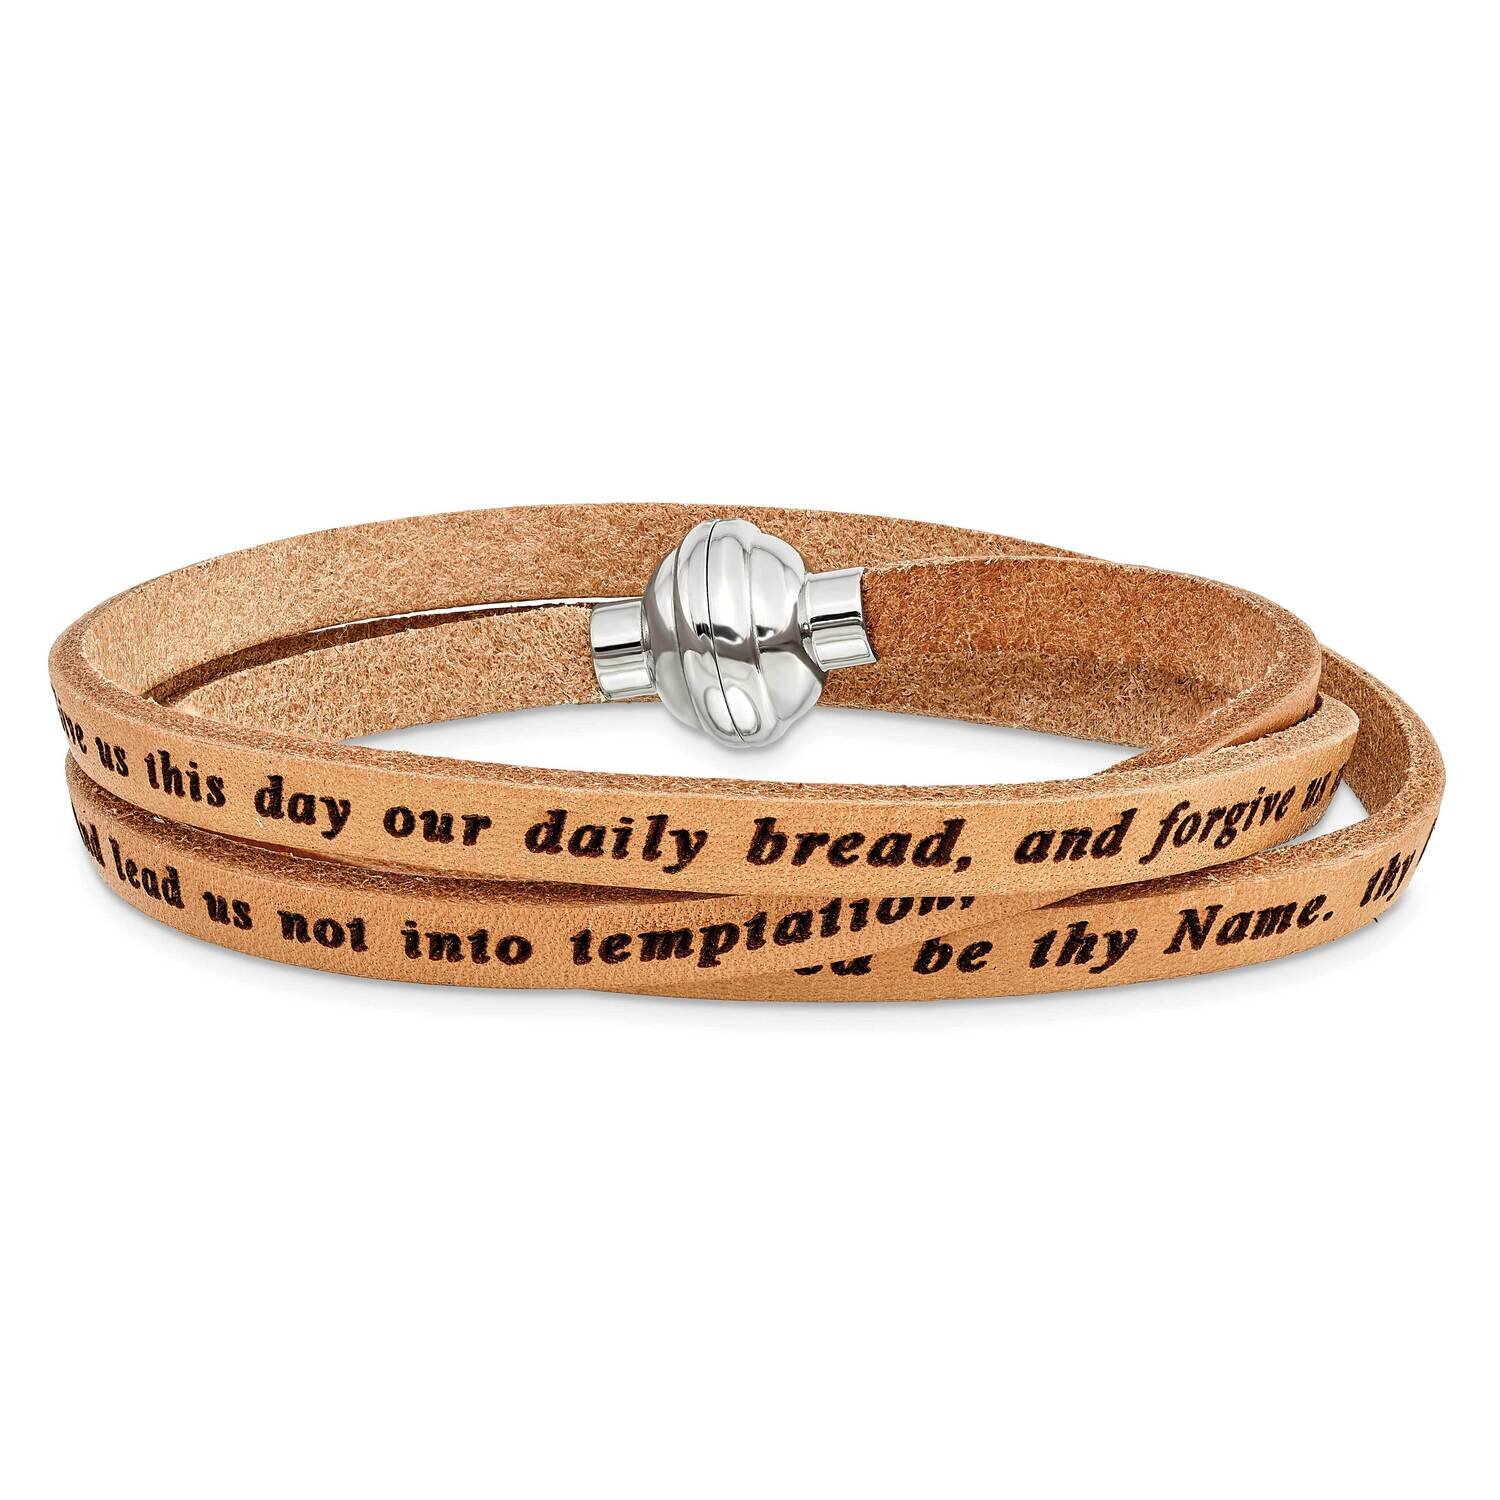 Lord's Prayer Tan Leather Wrap Bracelet Stainless Steel BF3231-MD